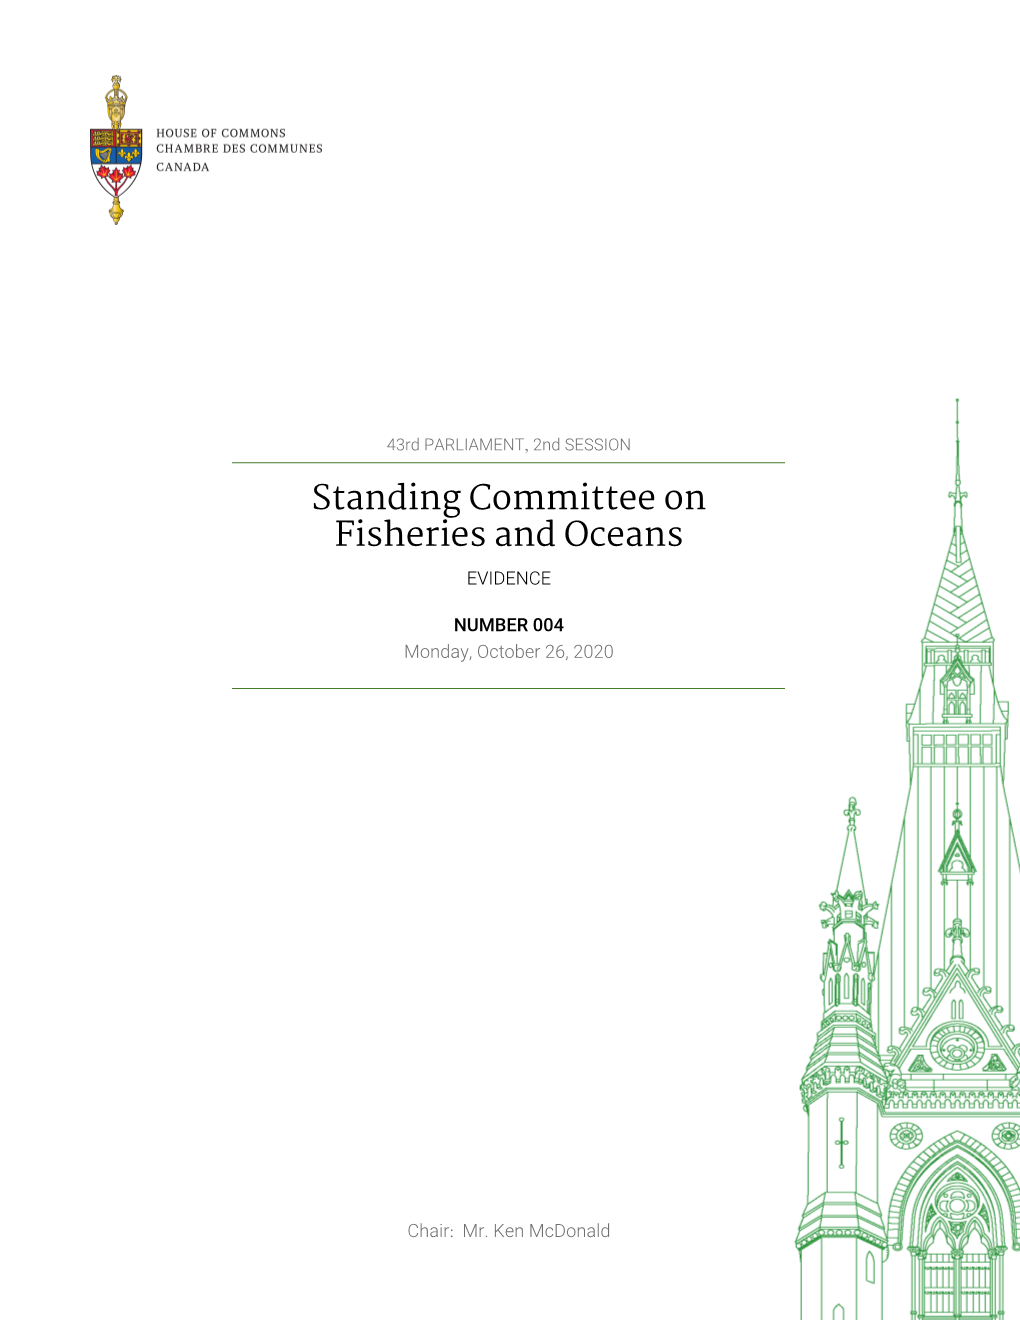 Evidence of the Standing Committee on Fisheries and Oceans